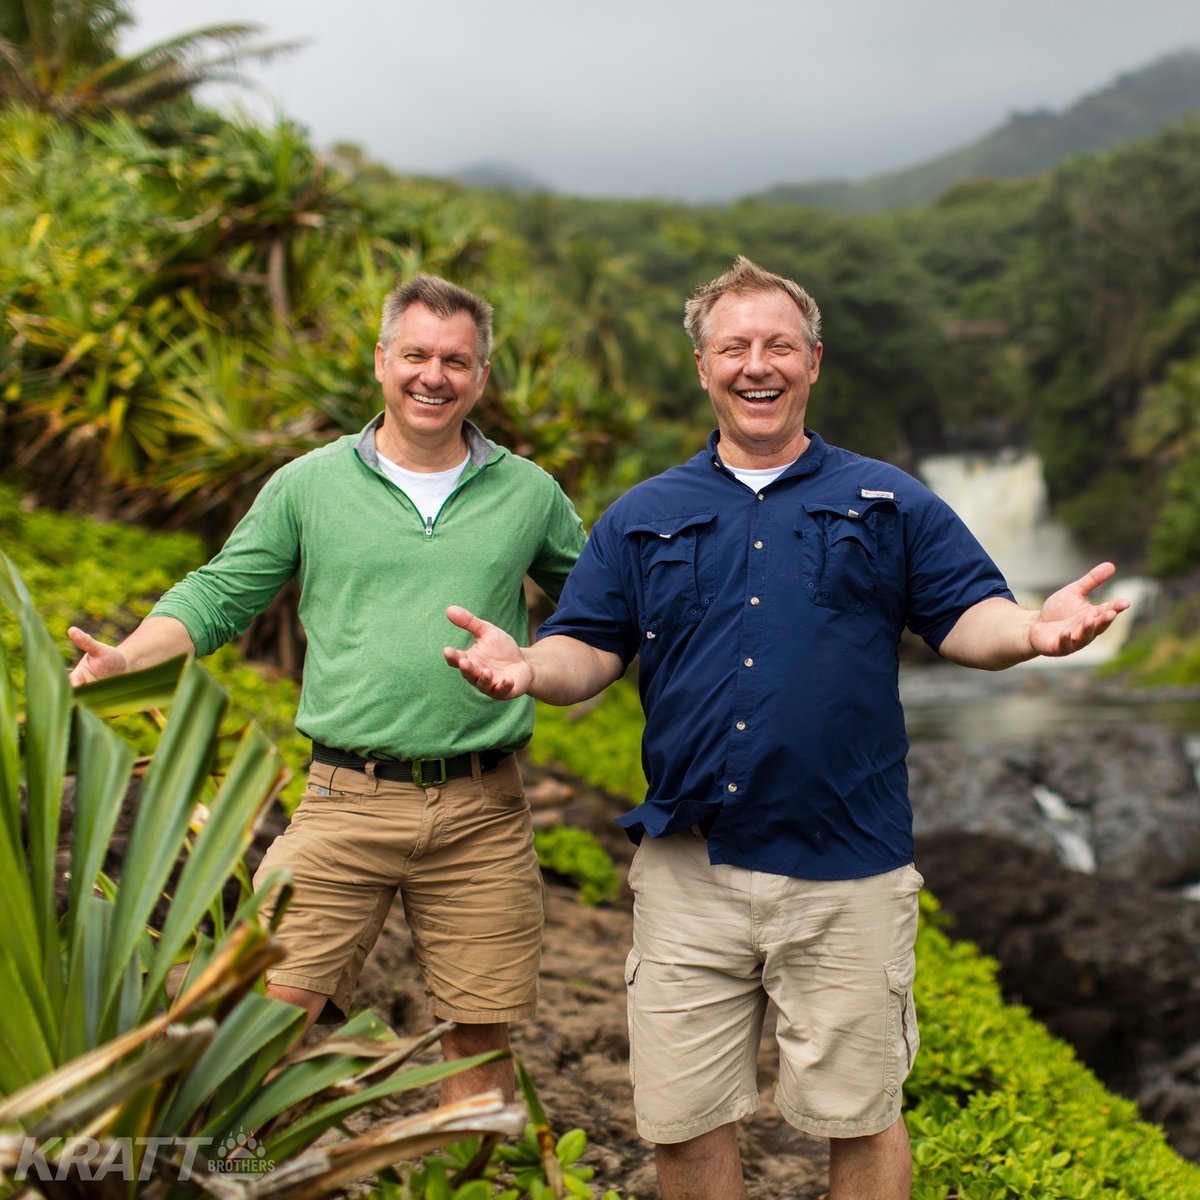 A 📷 from when we were filming in Hawaii for the new @WildKratts_TV movie special 'Our Blue and Green World' which premieres on @PBSKIDS next week! (April 1)